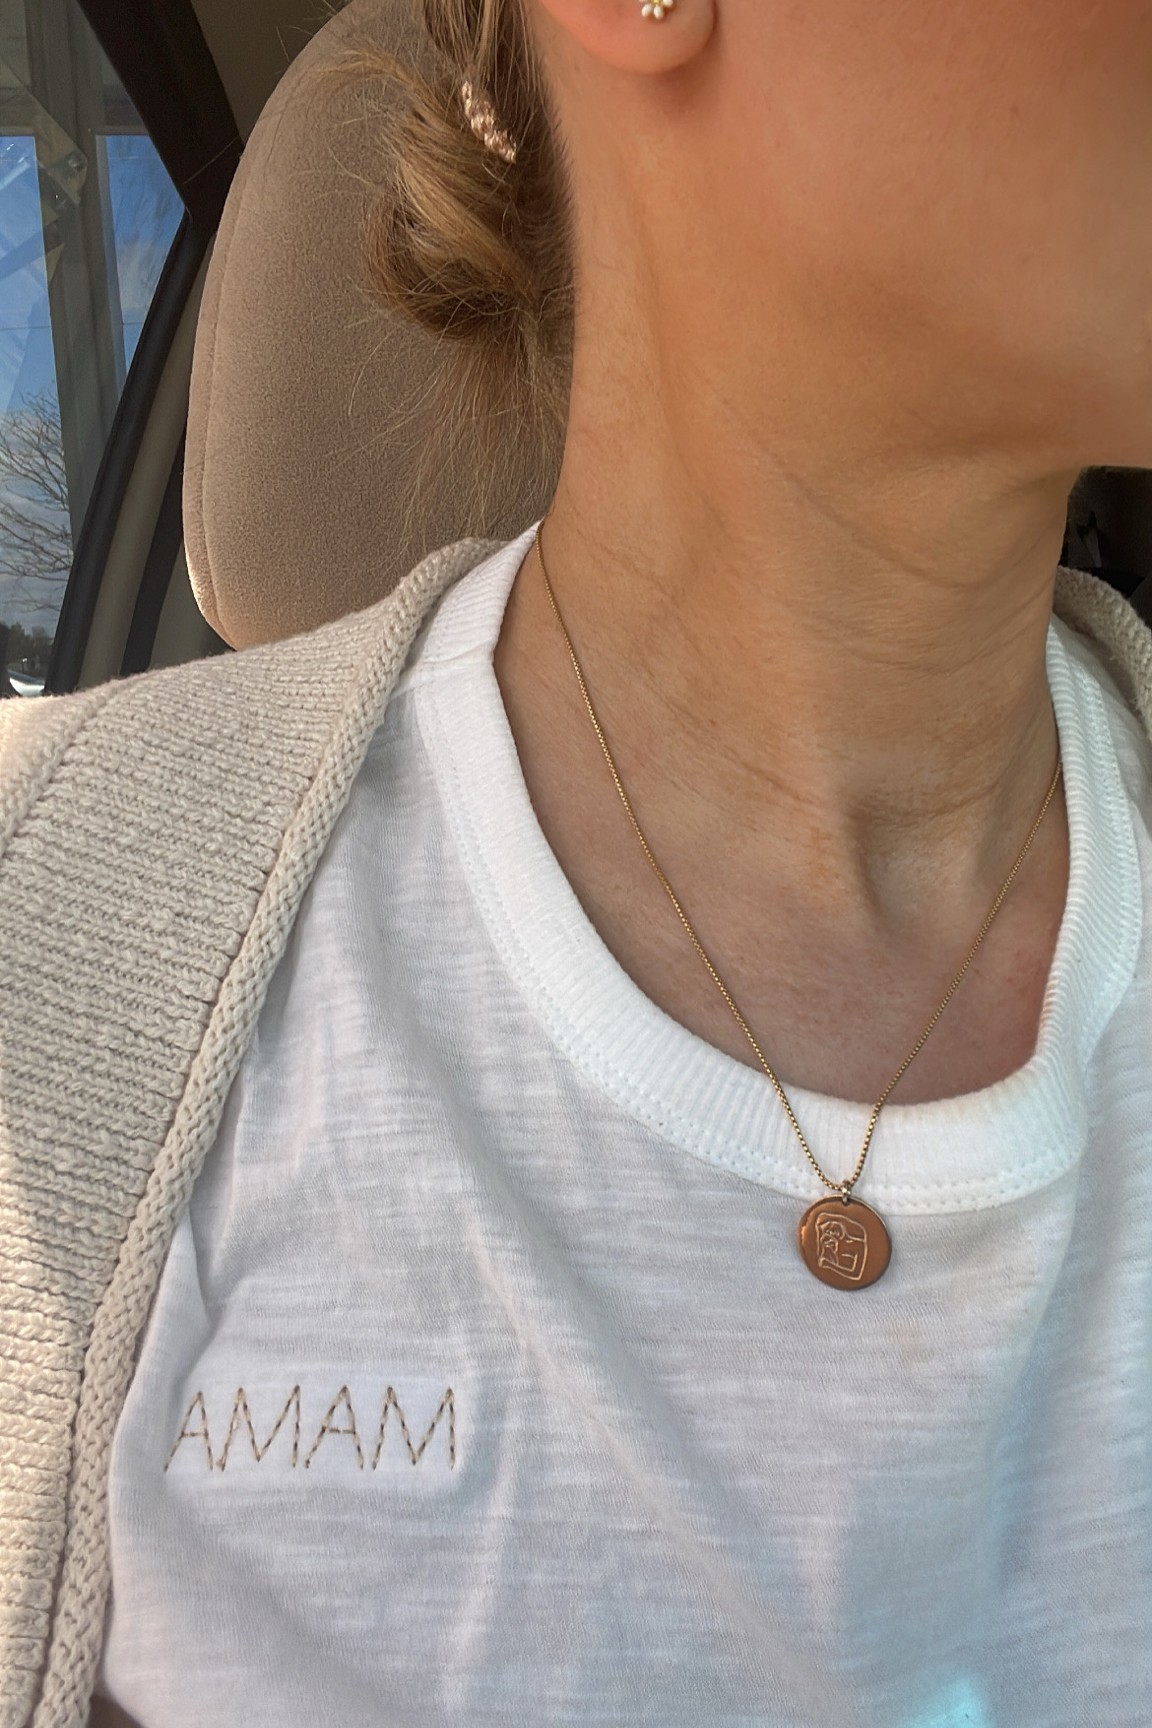 Karin Emily shares a mama tee from Madewell and a motherhood necklace from GLDN for her Mother's Day Gift Guide